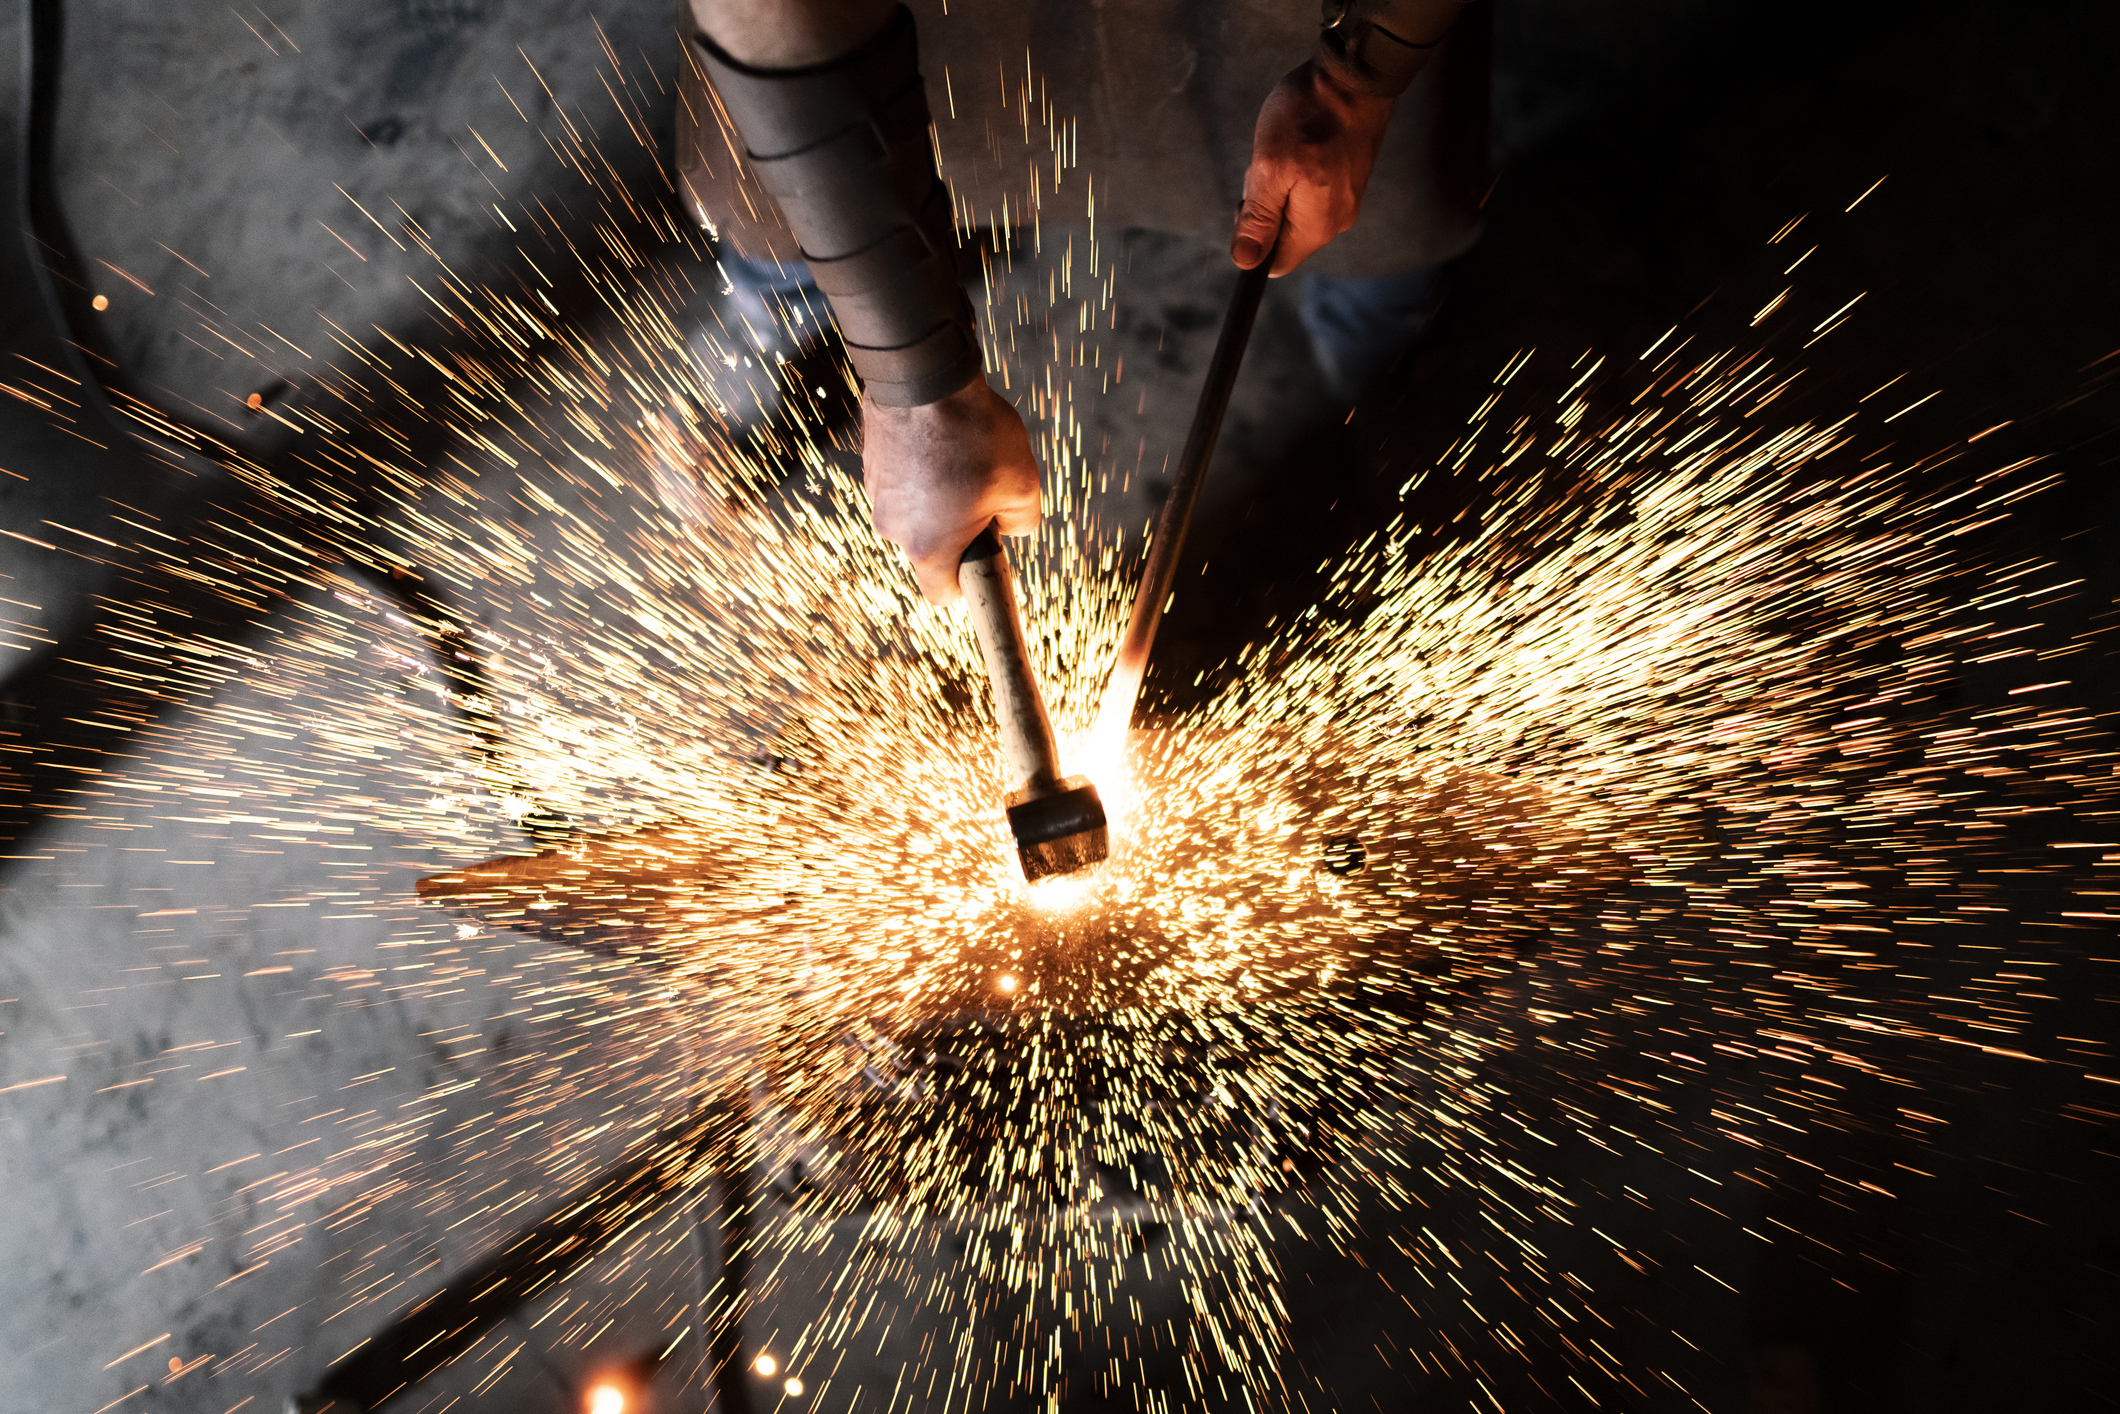 A skilled blacksmith is working in his workshop, using an anvil to drive a high-temperature iron to create a new work by creating many sparks flying in the dark;  hardware boot